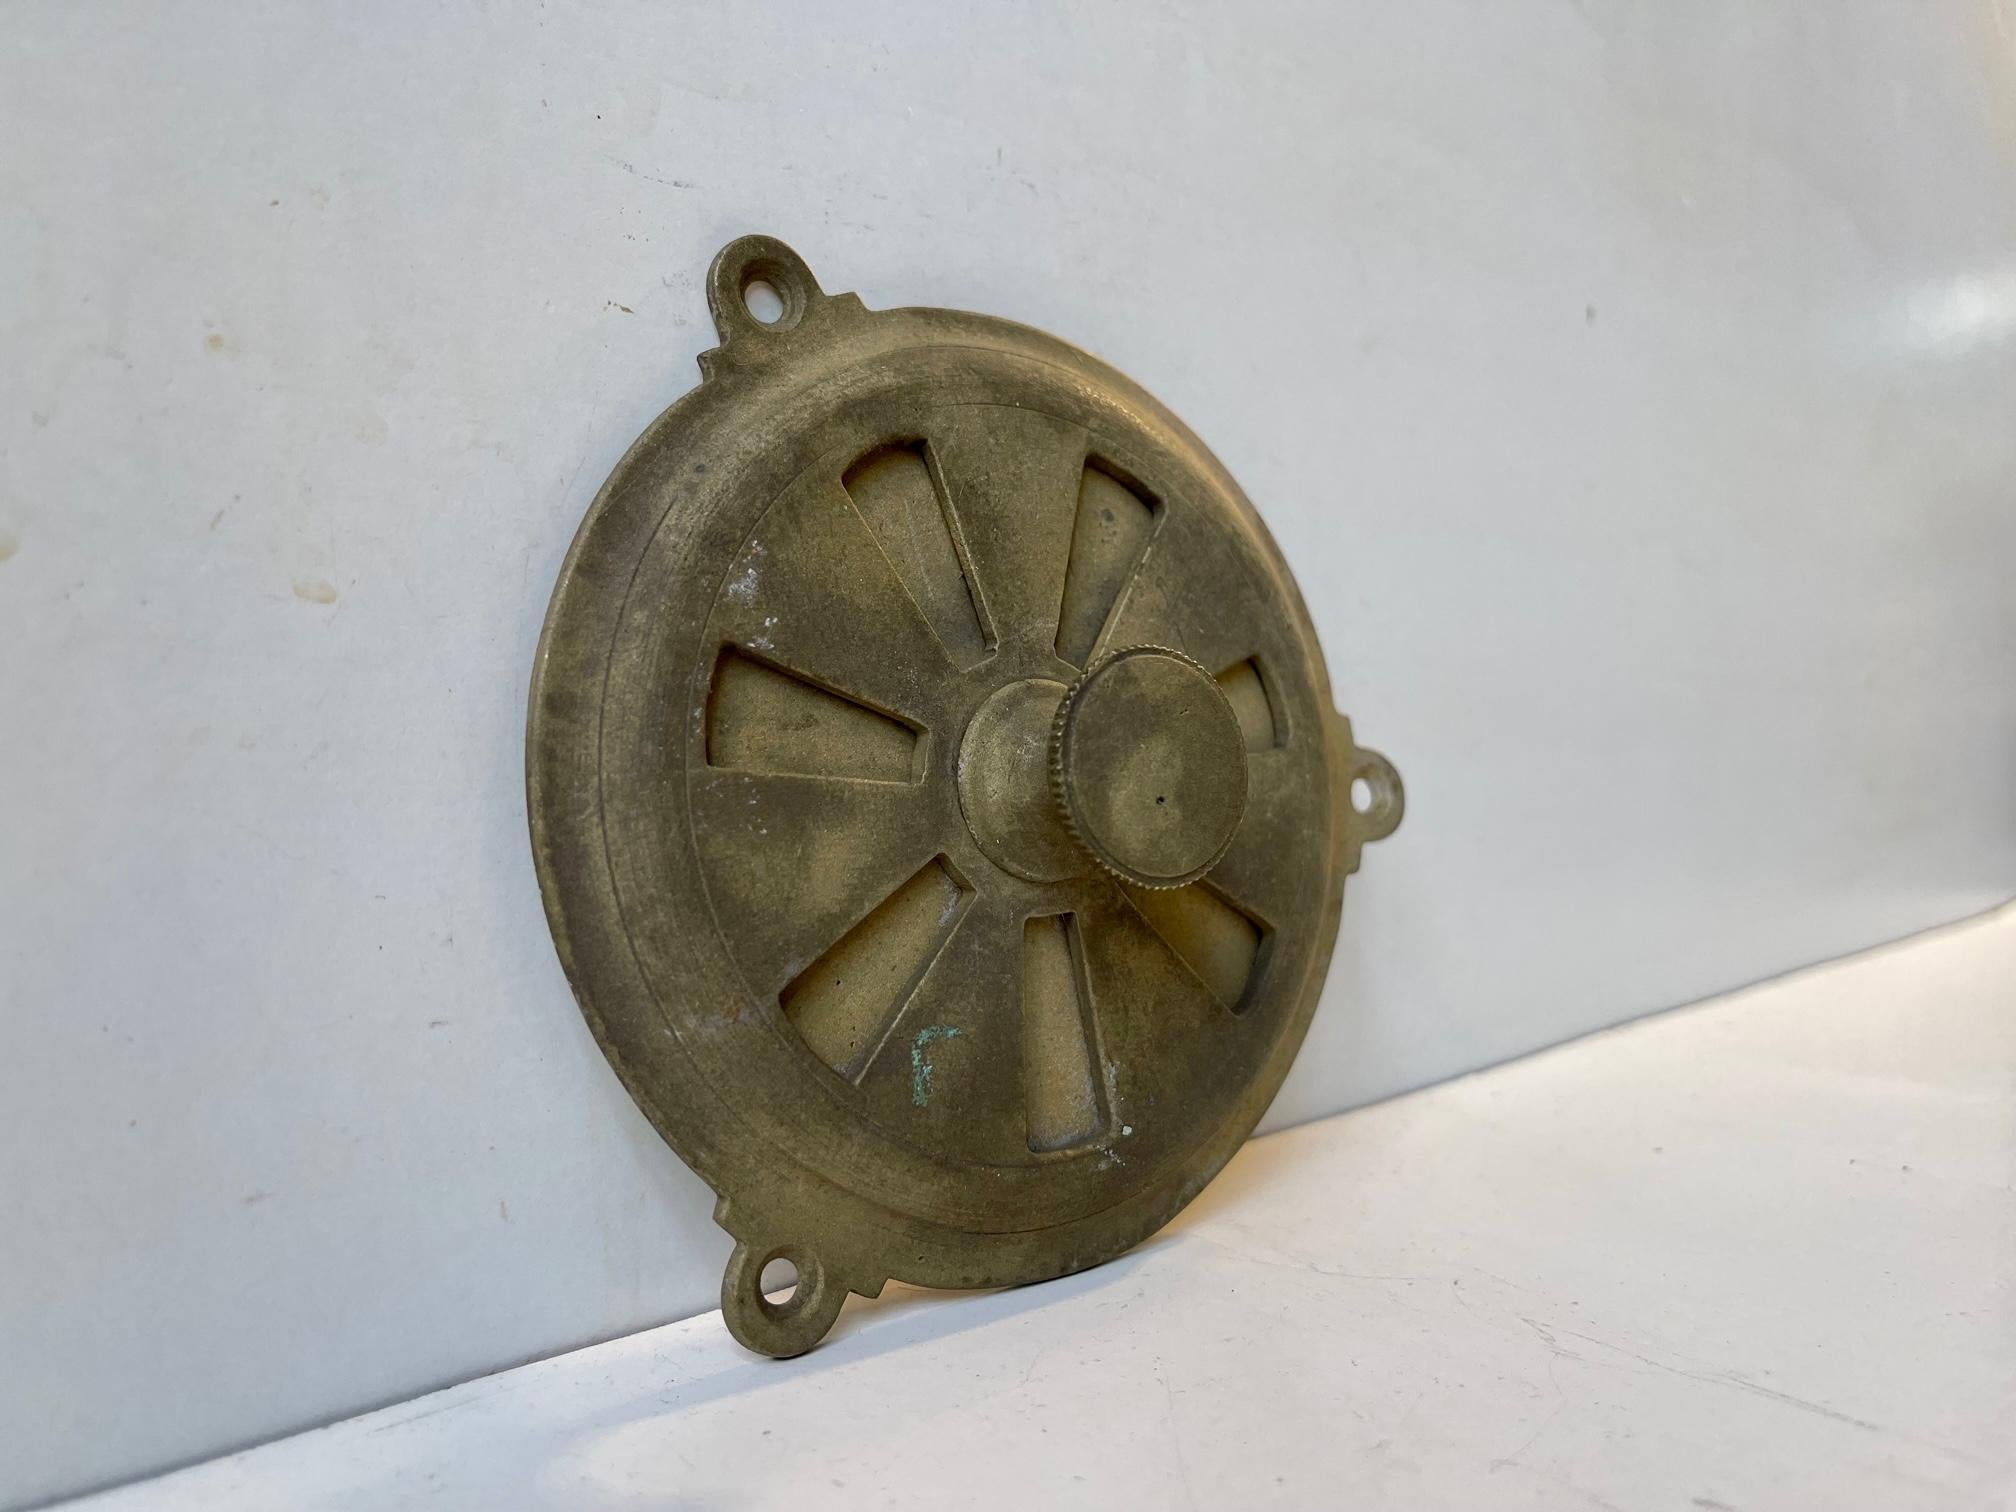 Original 1950s French built-in Air vent in solid brass. Finely machined knob/handle/adjuster. Measurements: Diameter: 10 cm. Suitable for doors, bathrooms, maritime environments or any setting where an authentic, raw and industrial look is desired.